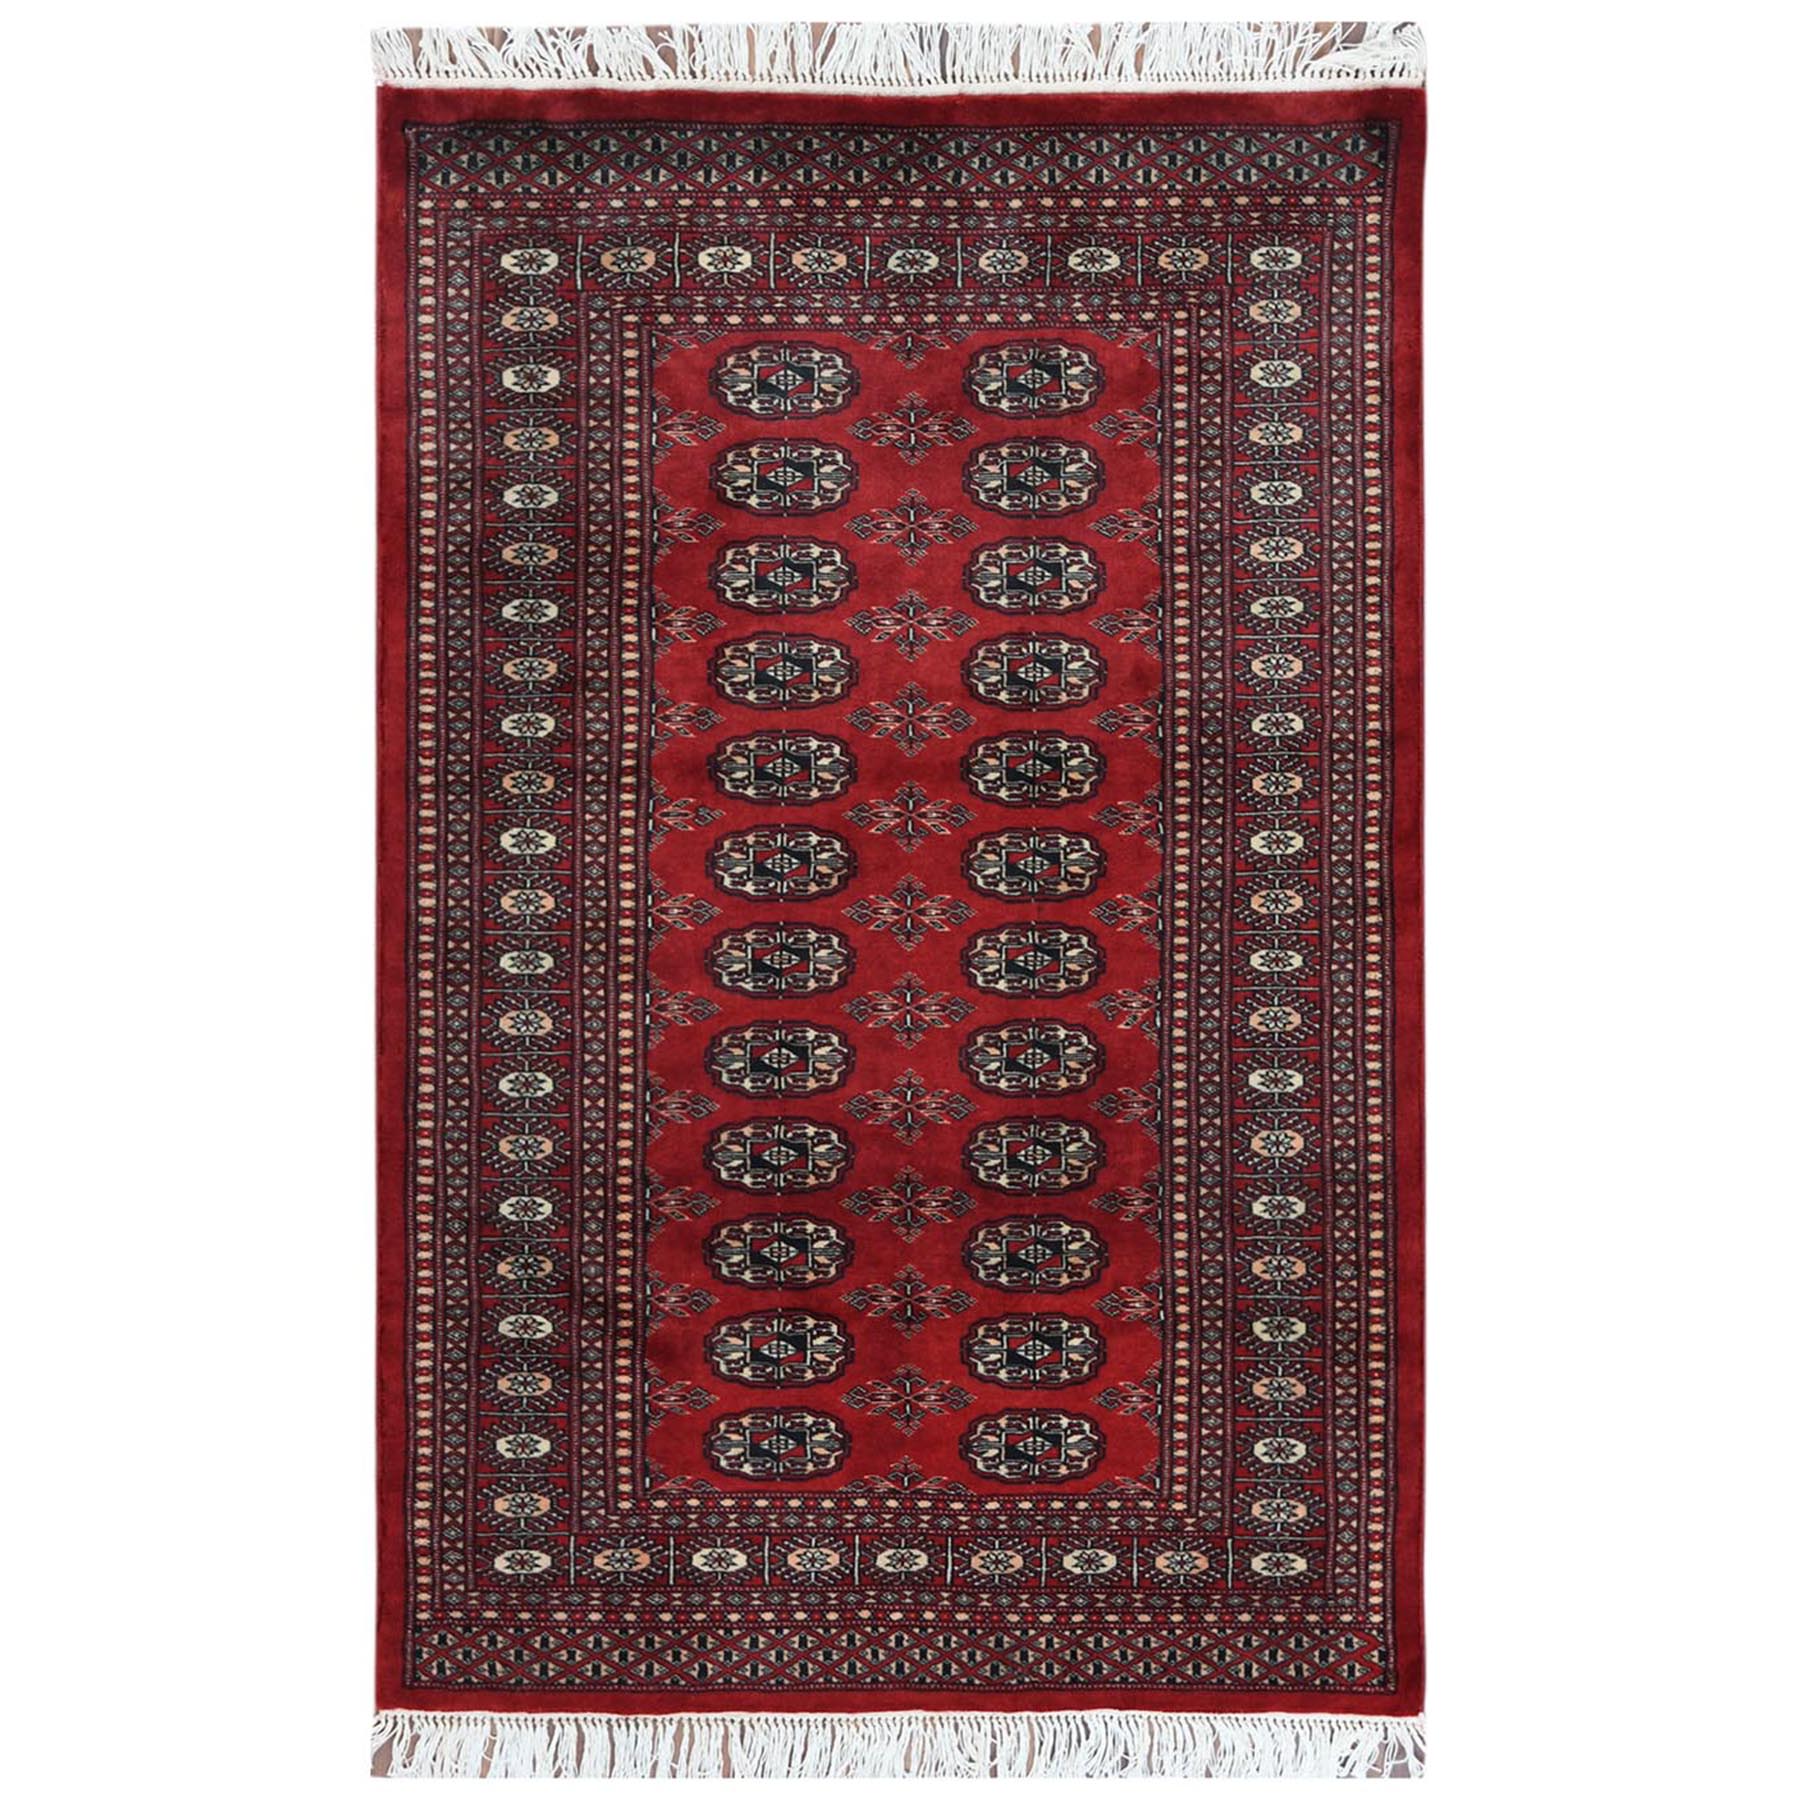 Nomadic And Village Collection Hand Knotted Red Rug No: 1122764